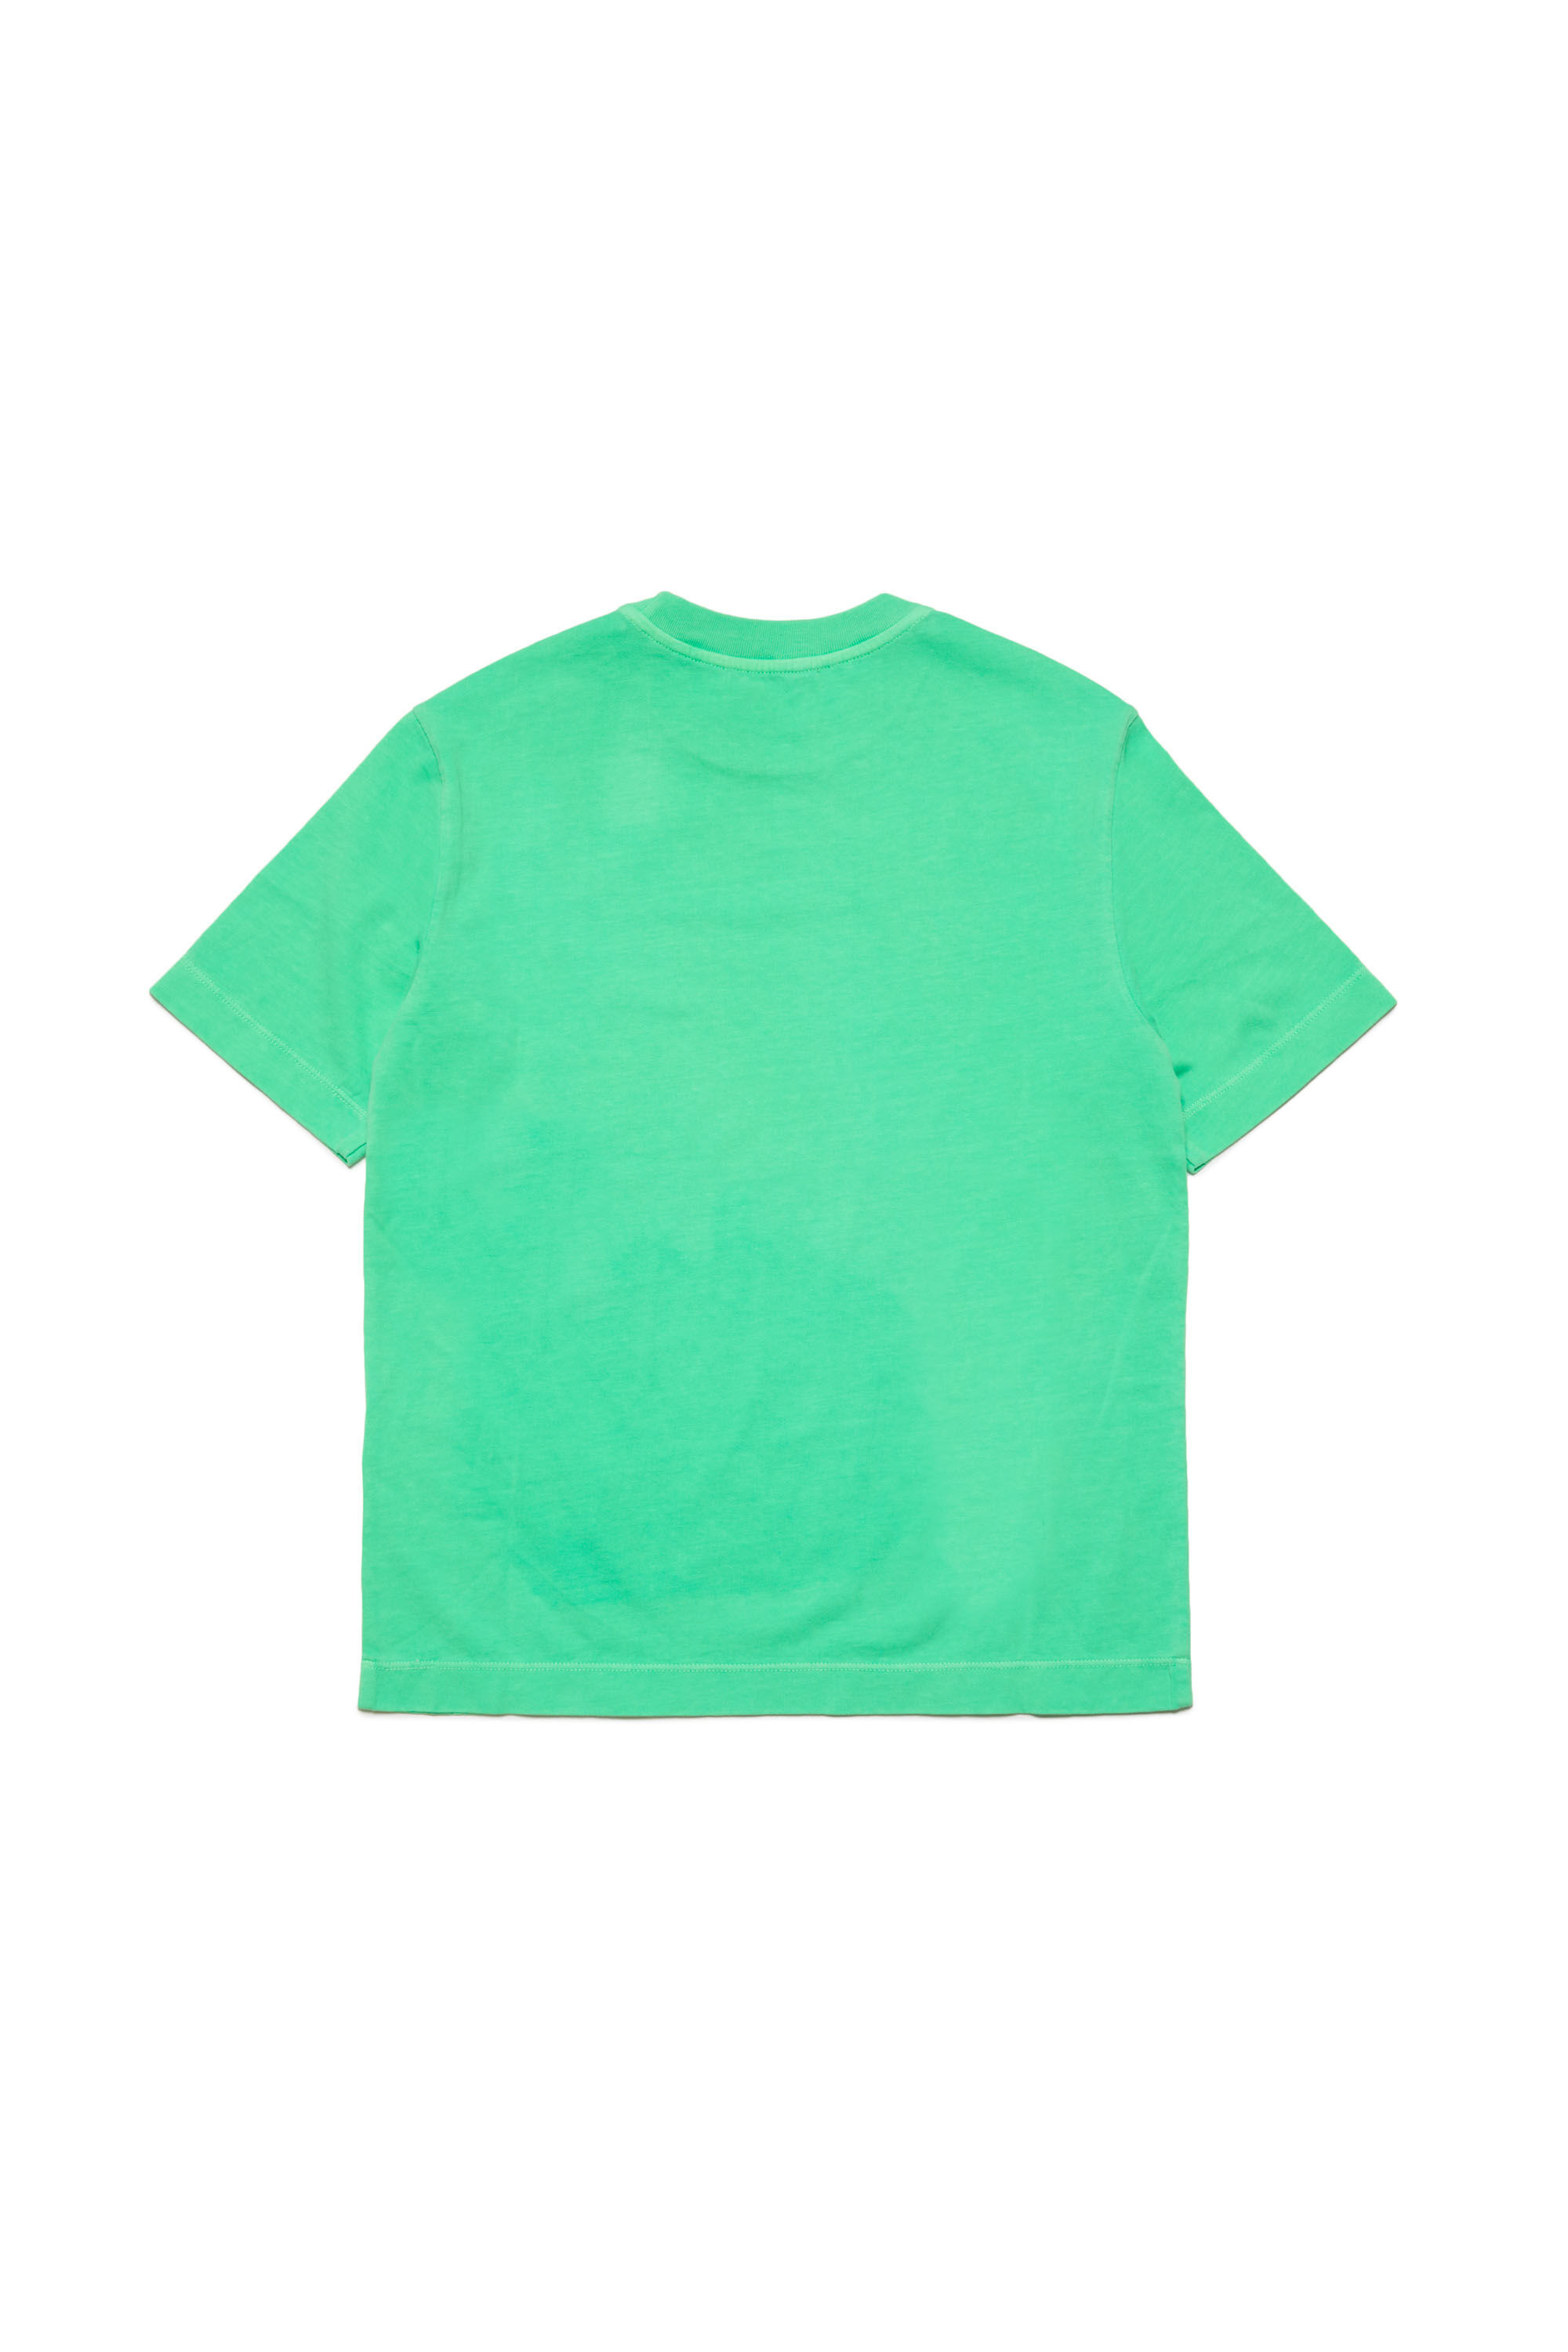 T-shirt with Diesel For Successful Living logo | Green | 4-16 